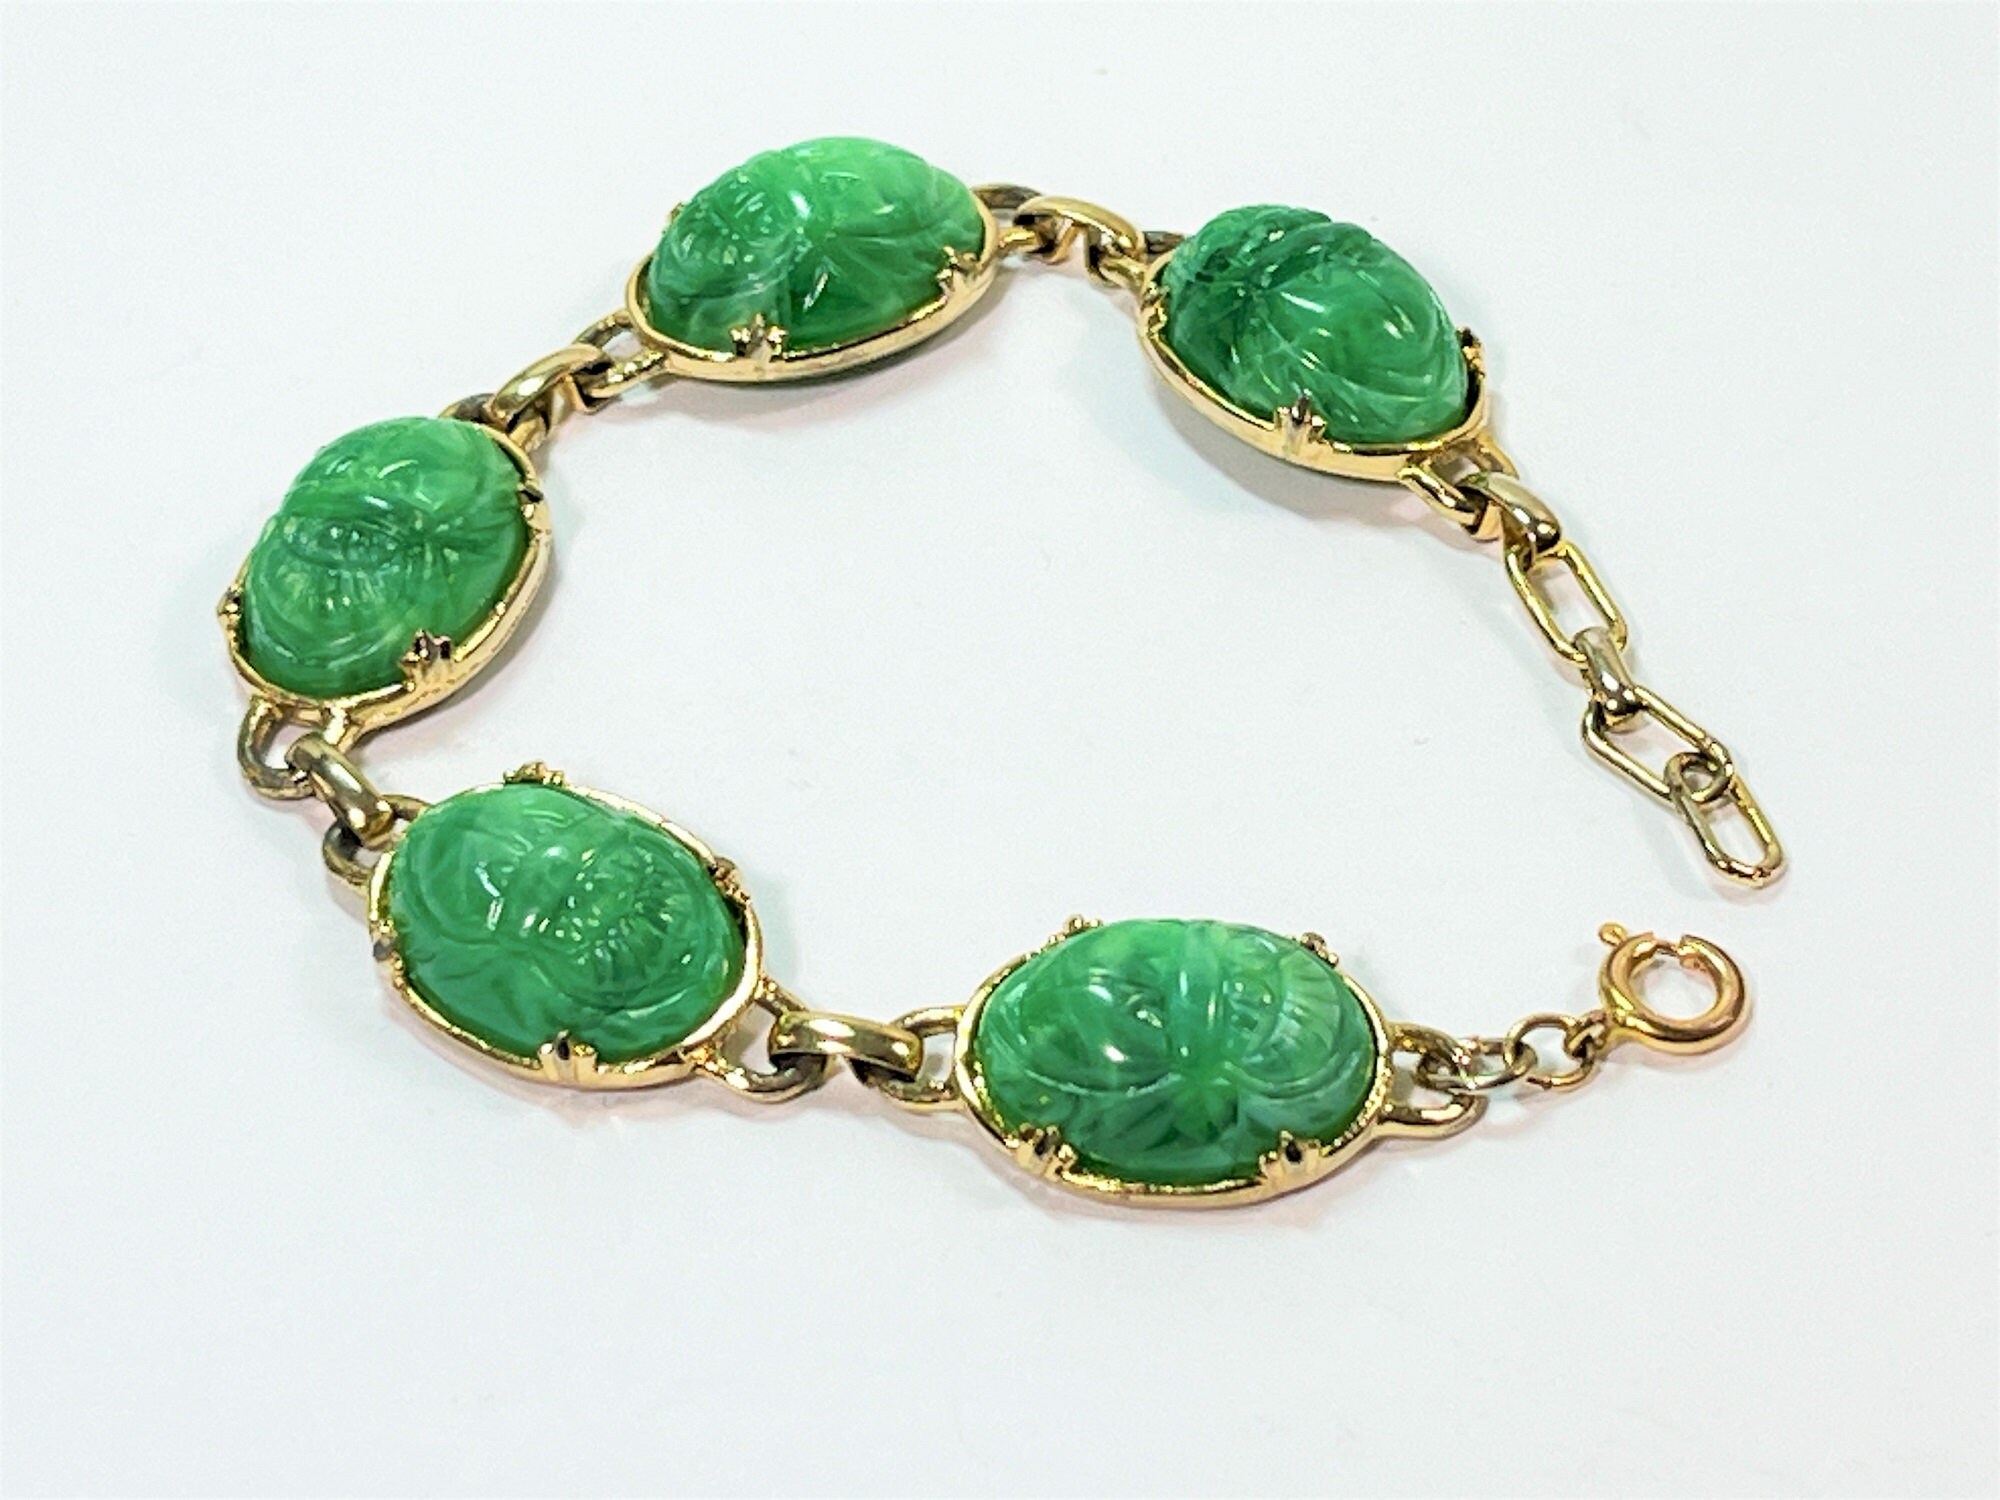 Vintage Gold Tone Scarab Bracelet, Seven Different Colors Scarabs 9X7mm,  7.5 Long. Fold Over Clasp. Free US Shipping.